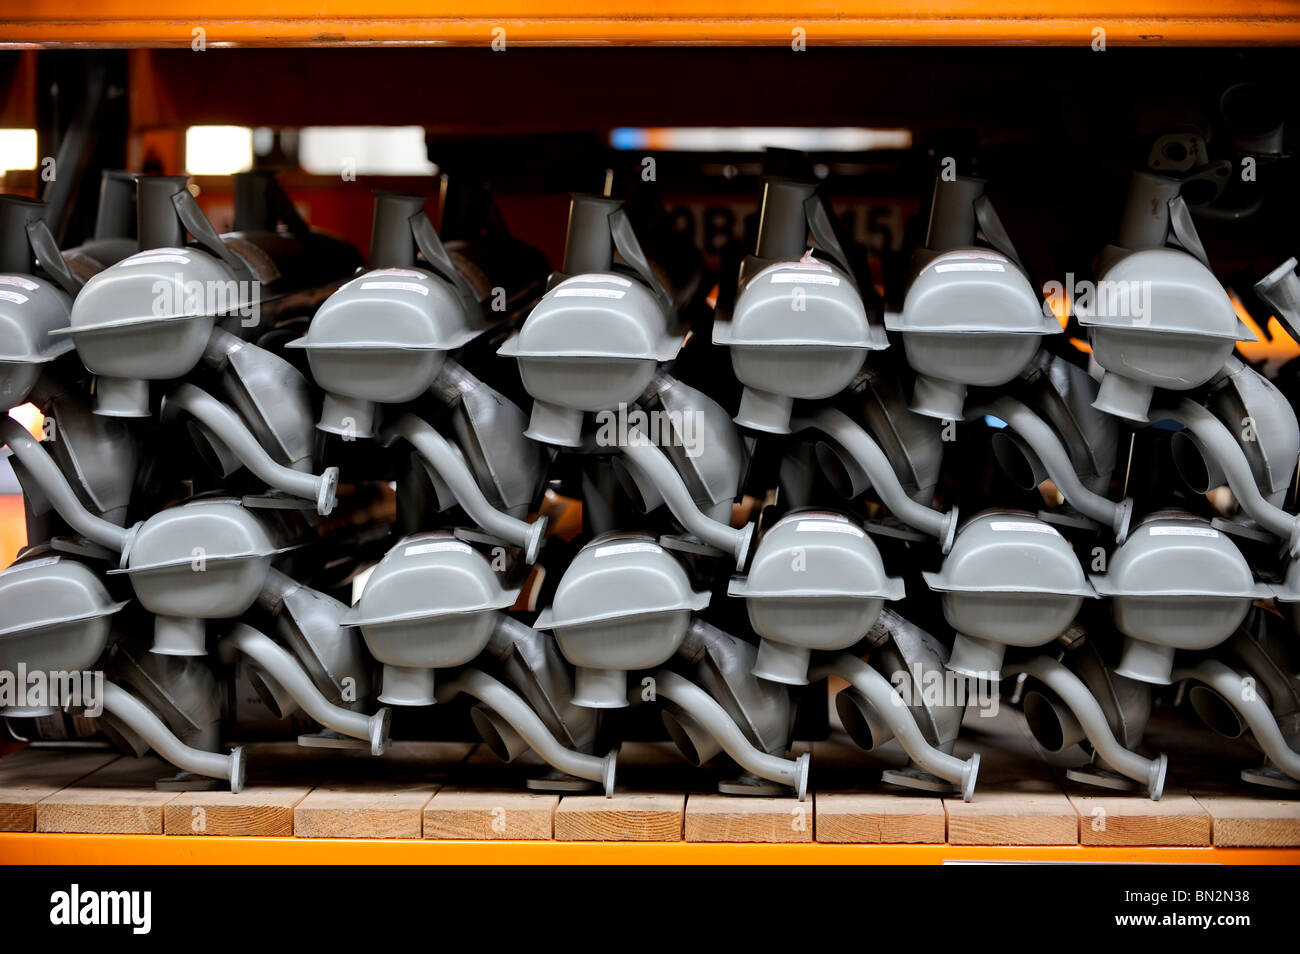 Spare parts for VW camper vans and cars stacked on a supplier's shelves. Stock Photo